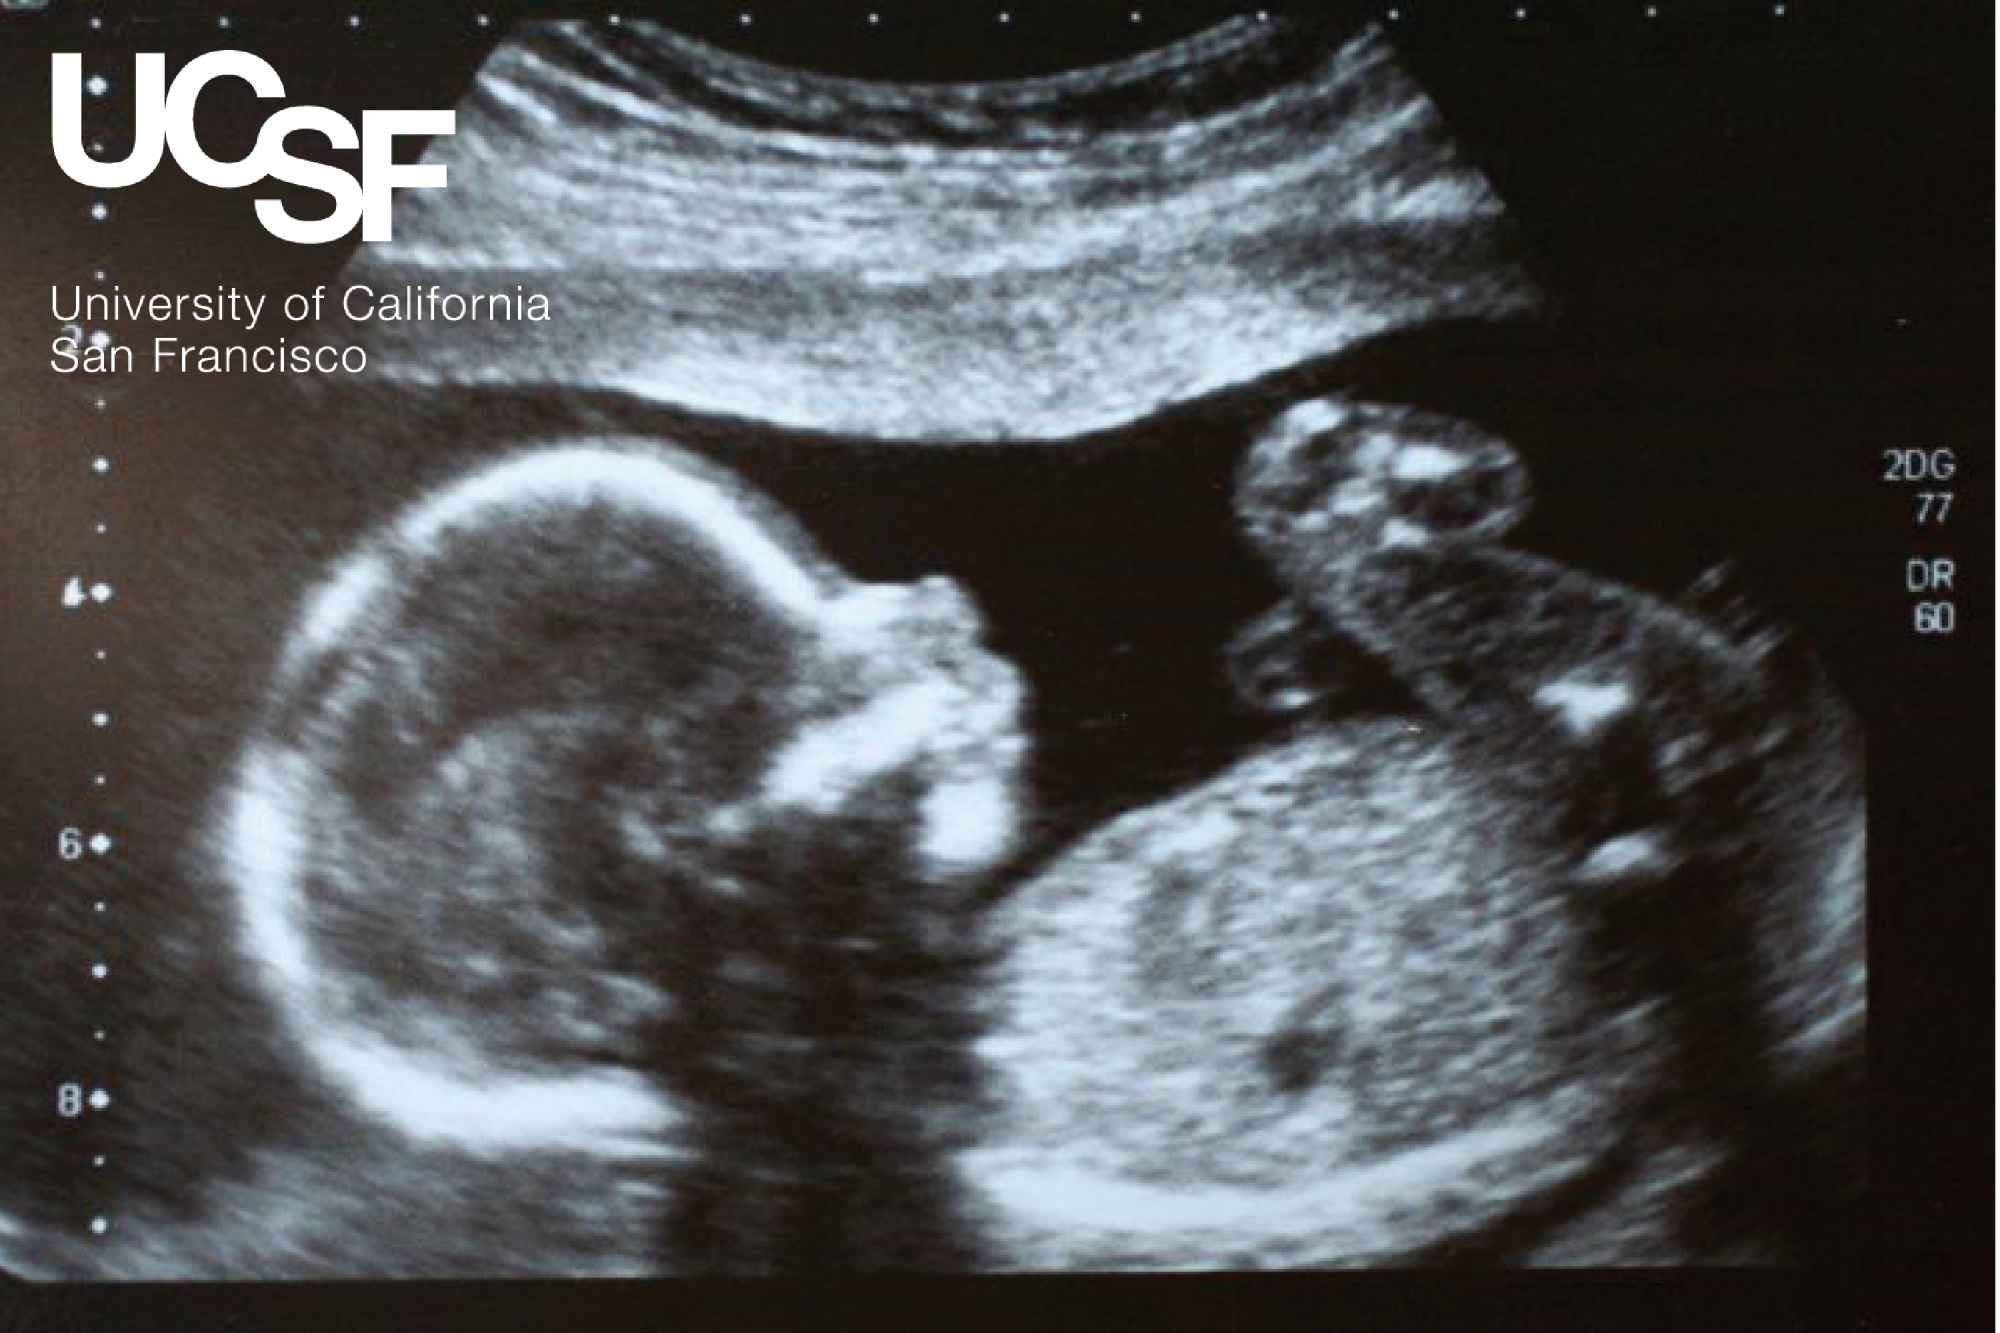 ultrasound with ucsf logo